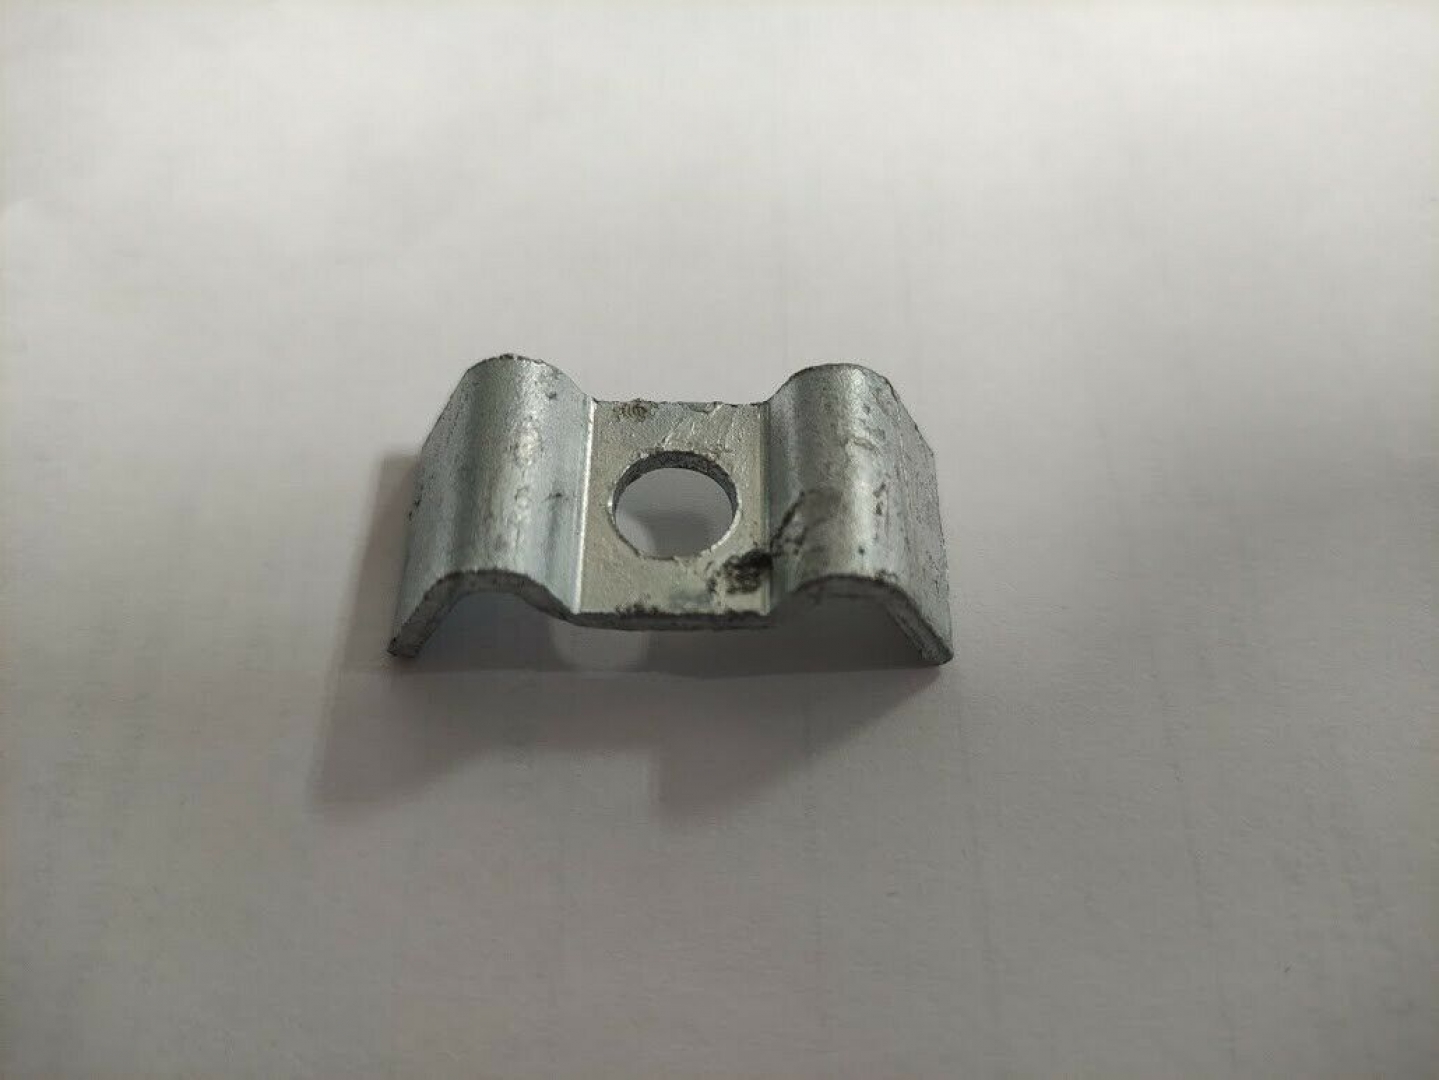 10x Bracket upper part no. 1 for grating clamps for mesh size 22x22mm